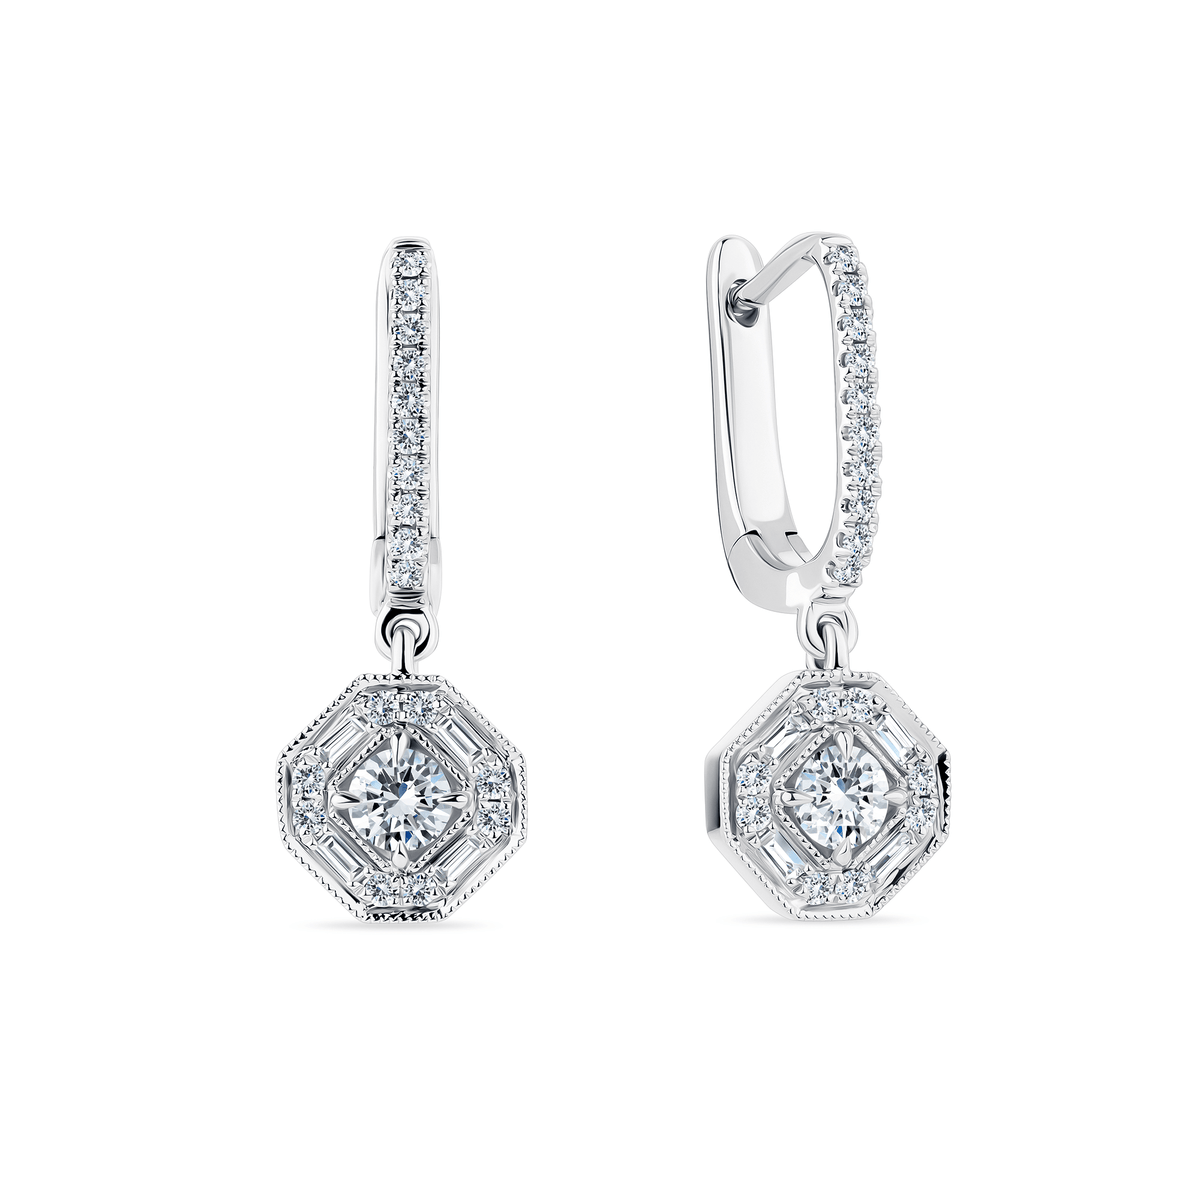 1917™ 0.54ct TW Diamond Vintage Halo Drop Earrings in 18ct White Gold - Wallace Bishop